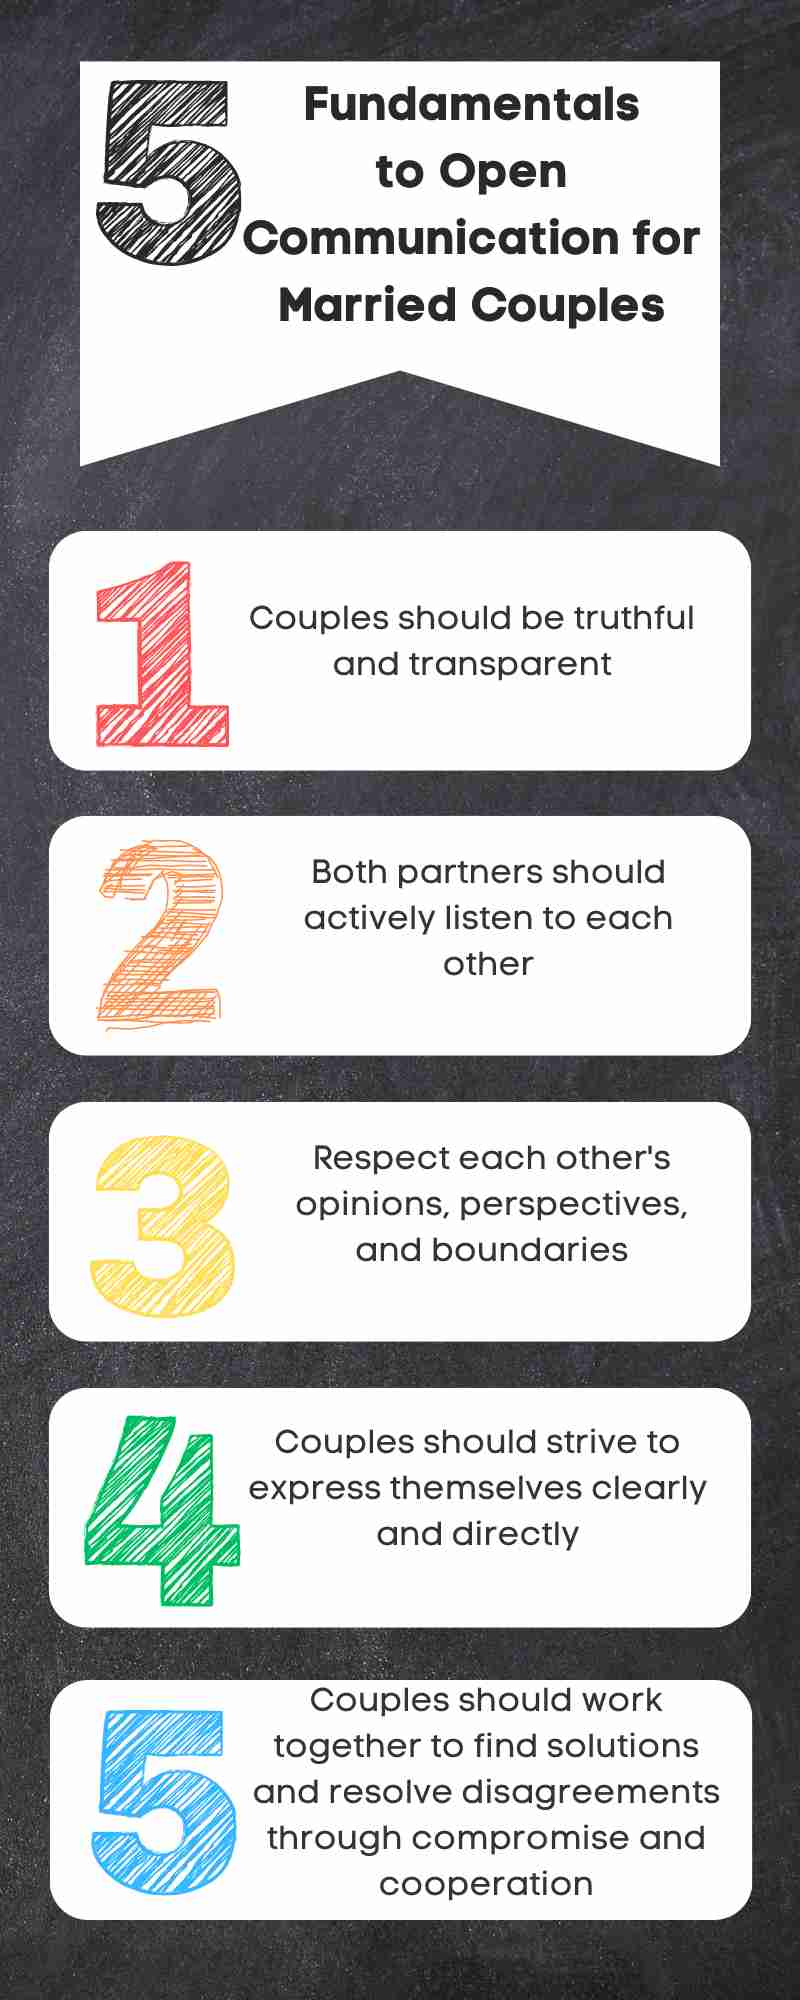 Infographic titled "fundamentals to open communication for married couples," listing five key points: truthfulness, active listening, respect for boundaries, clear expression, and compromise.